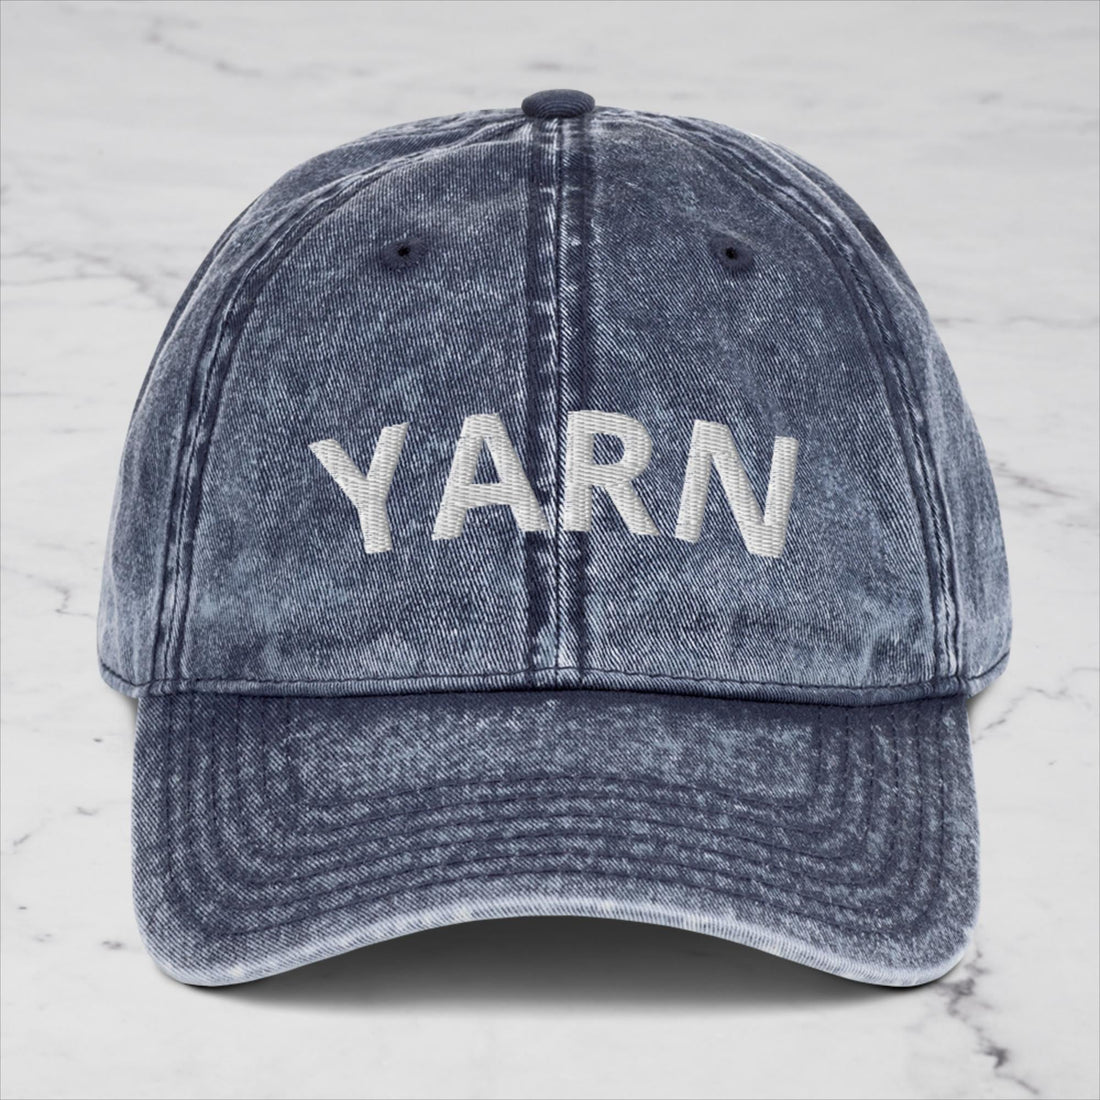  Navy YARN Vintage Cotton Twill Dad Hat by Lift Bridge Yarns sold by Lift Bridge Yarns